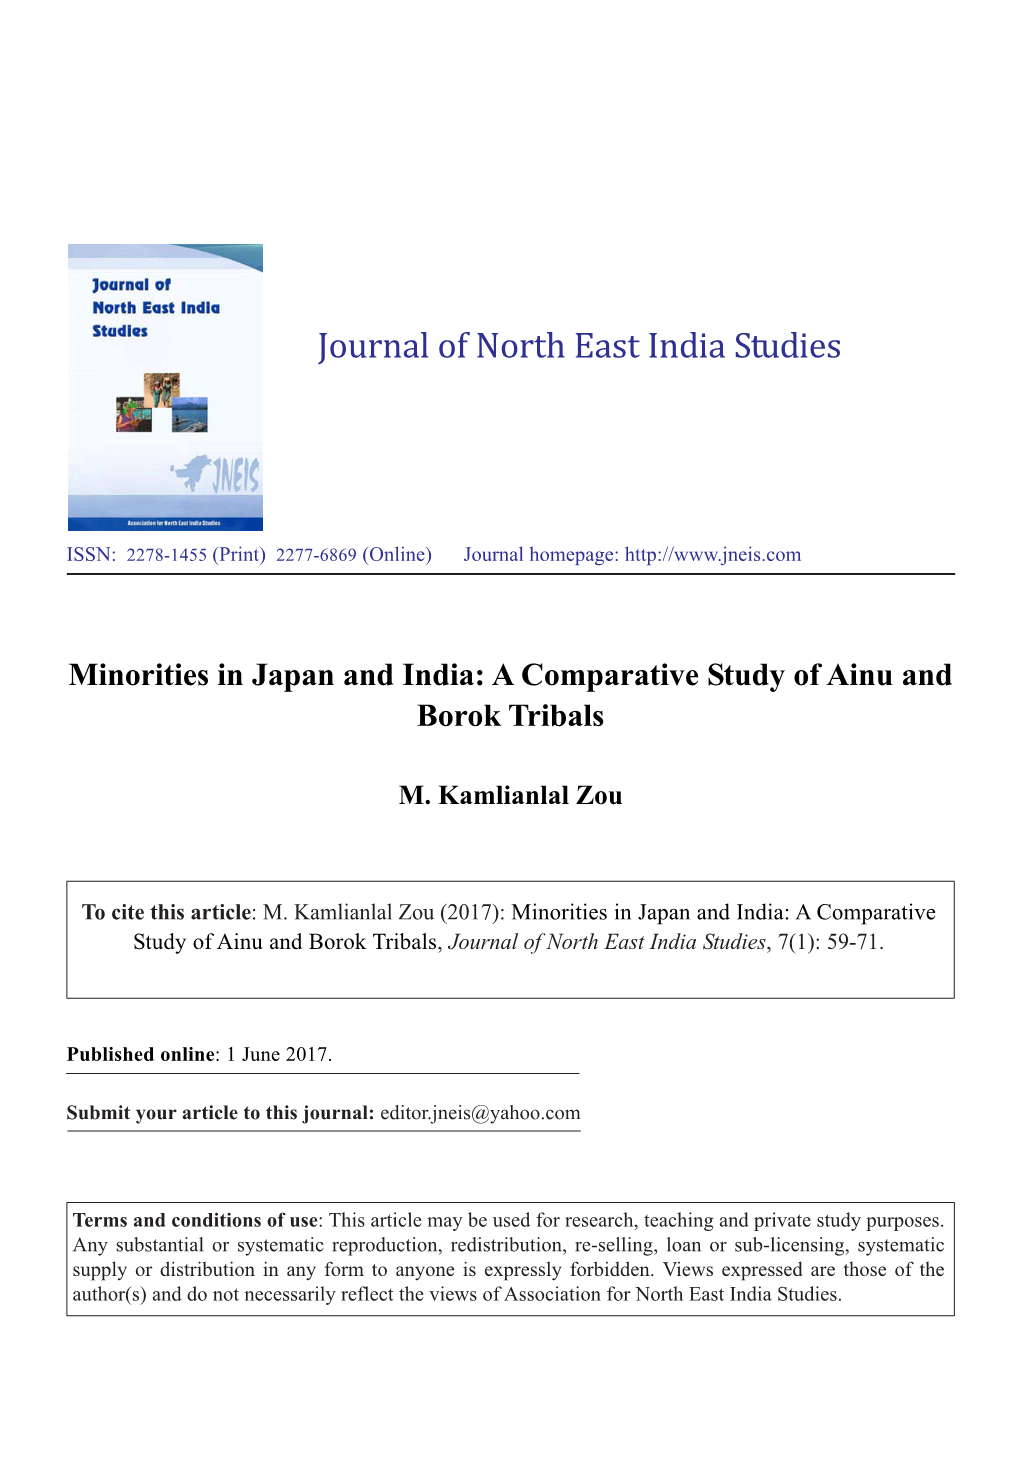 Journal of North East India Studies